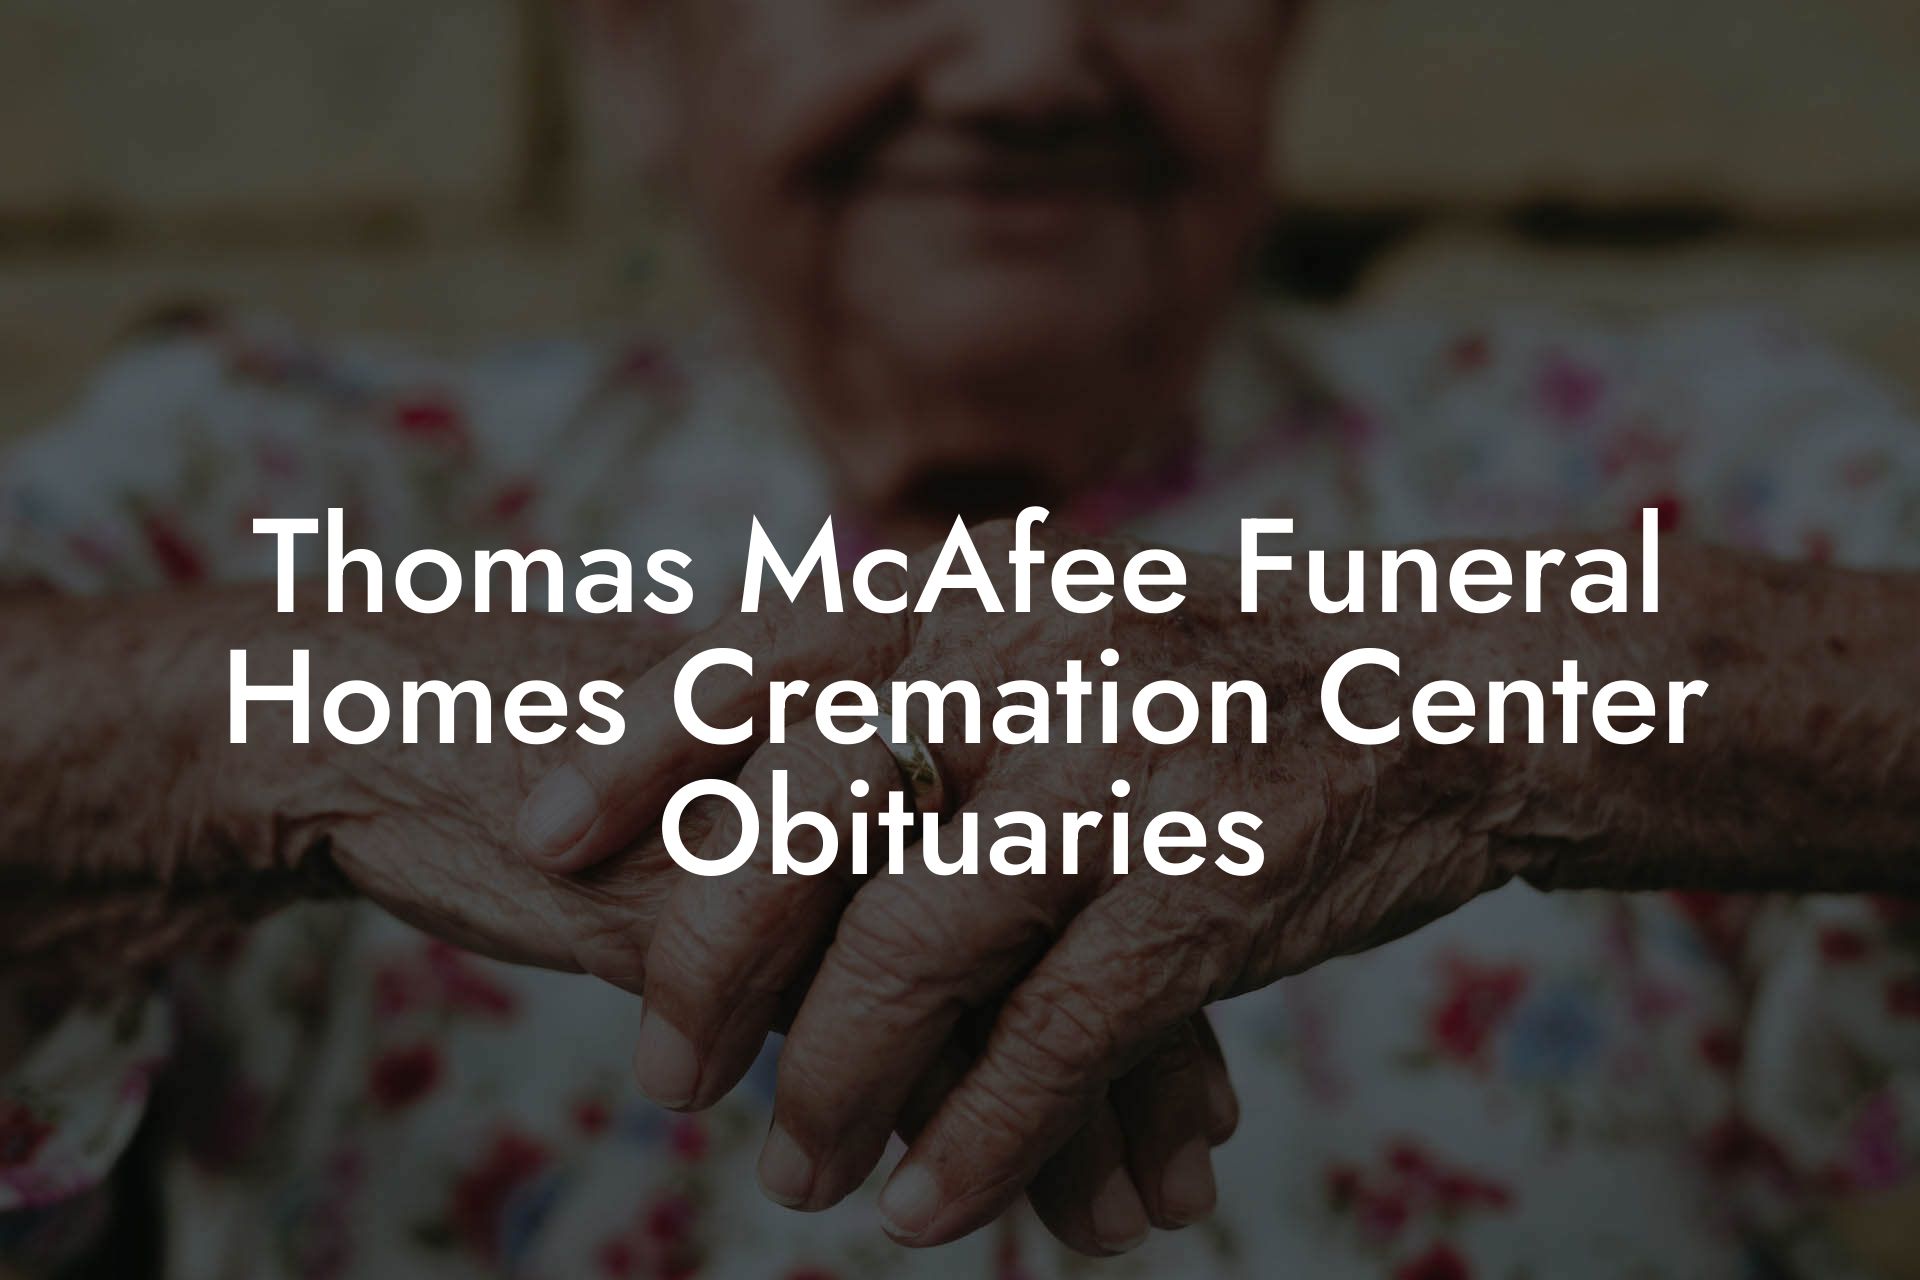 Thomas McAfee Funeral Homes - Cremation Center Obituaries